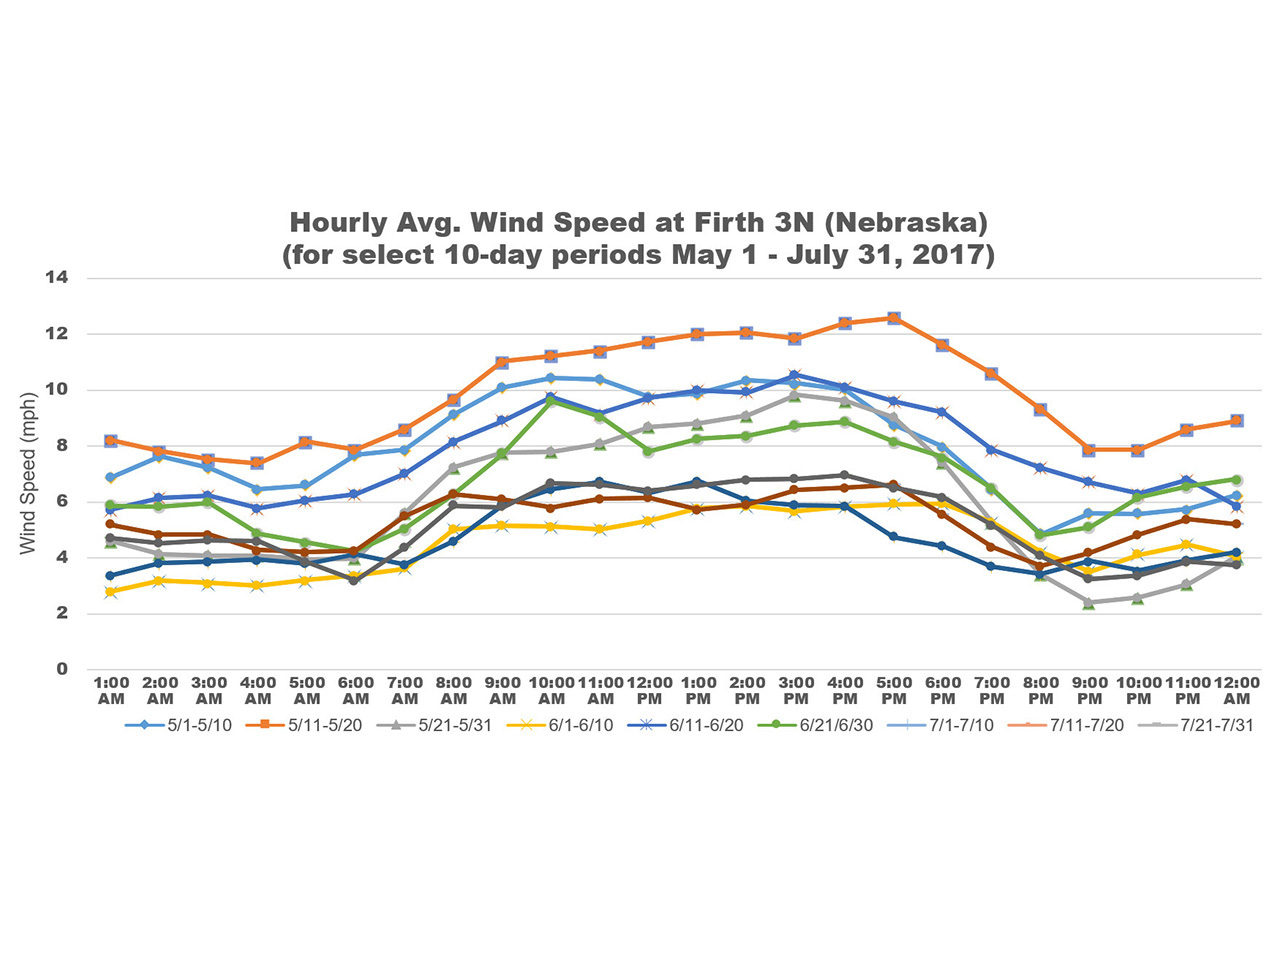 Hourly average wind speed for nine, ten-day periods from May 1 to July 31, 2017 at the Firth 3N Nebraska Mesonet weather station. Data from the High Plains Regional Climate Center at  http://hprcc.unl.edu.